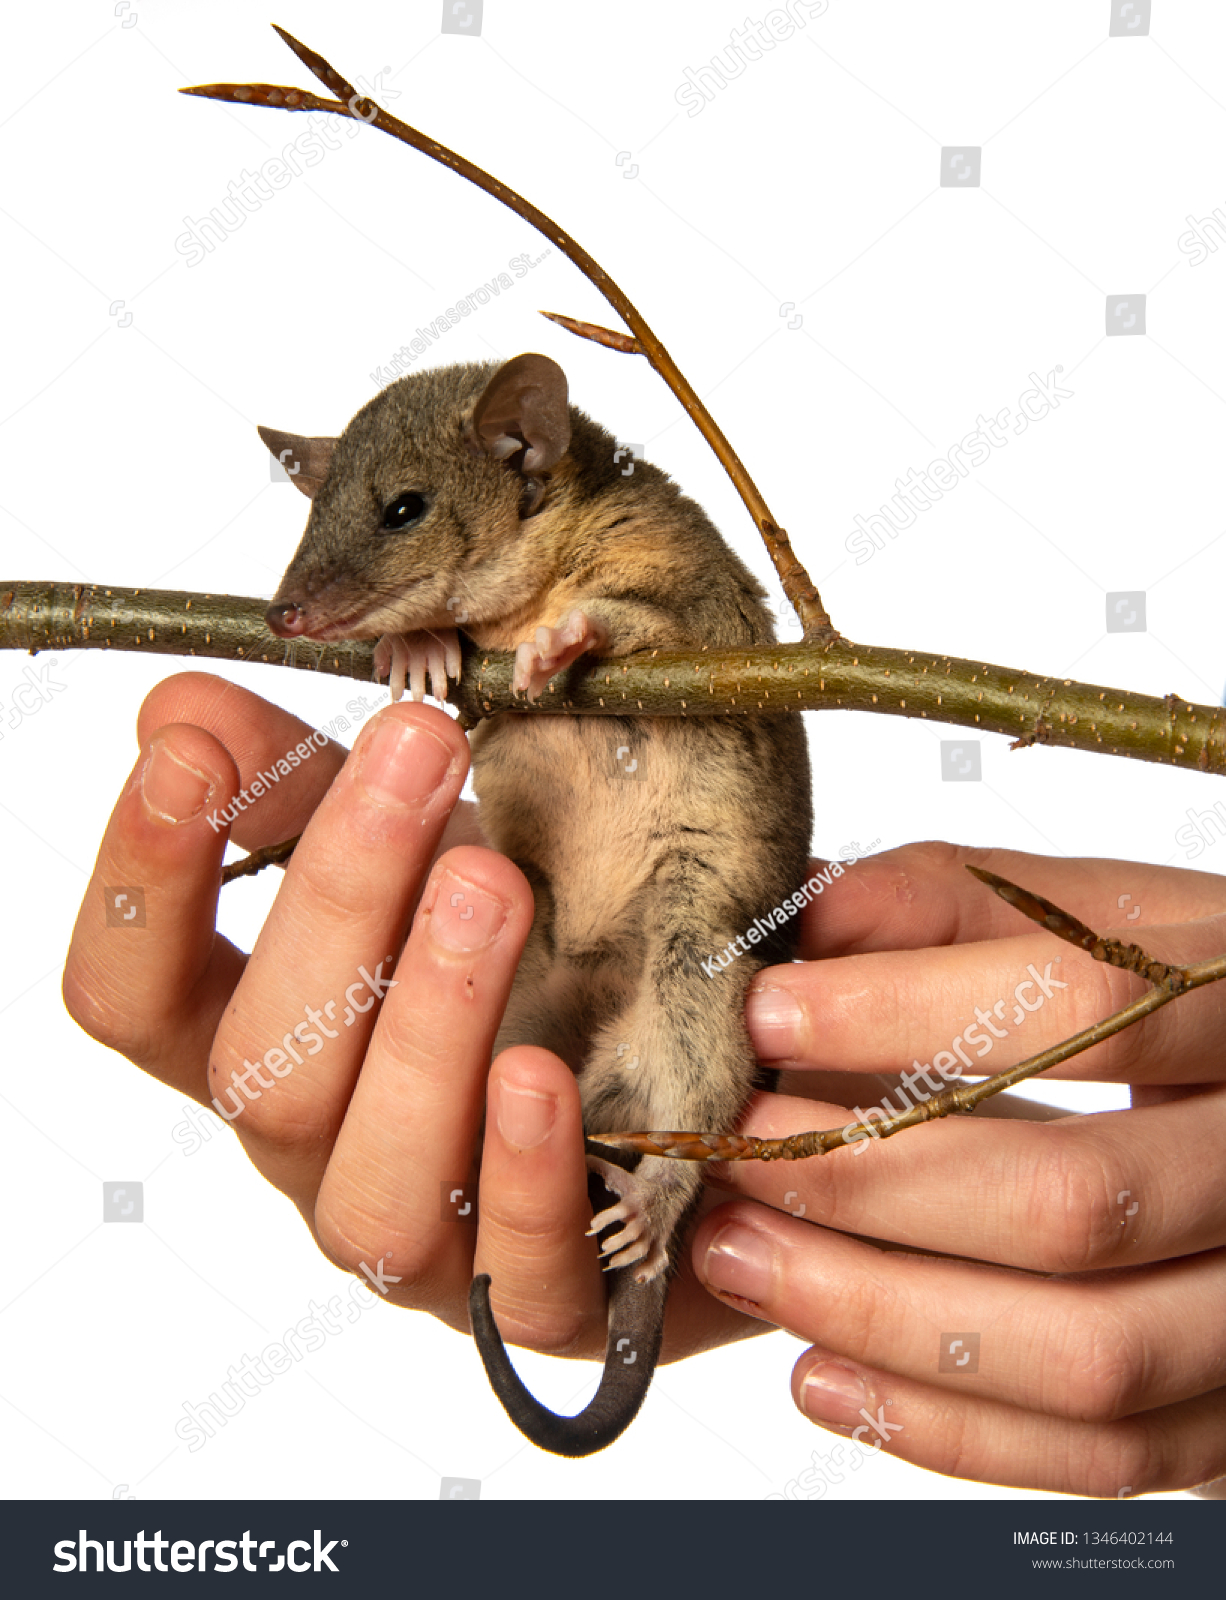 Monodelphis Domestica Gray Shorttailed Opossum Stock Photo Edit Now 1346402144,Baked Chicken Breast Meal